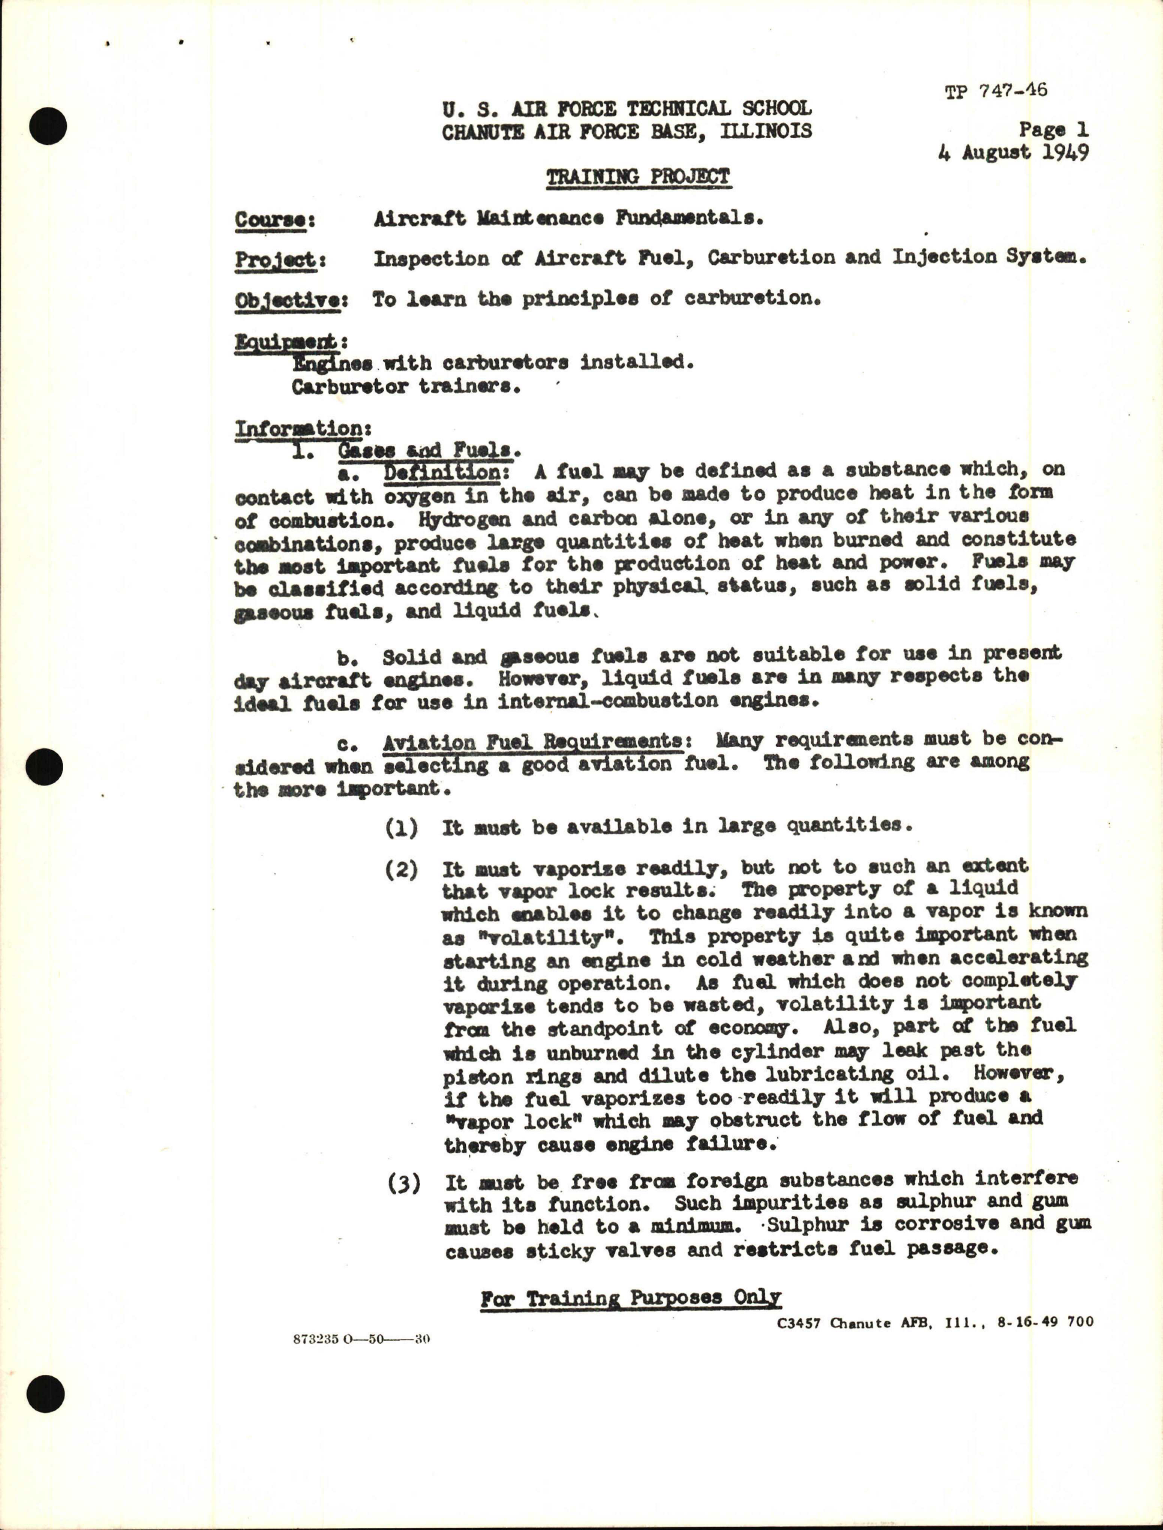 Sample page 1 from AirCorps Library document: Training Project, Inspection of Aircraft Fuel, Carburetion and Injection System